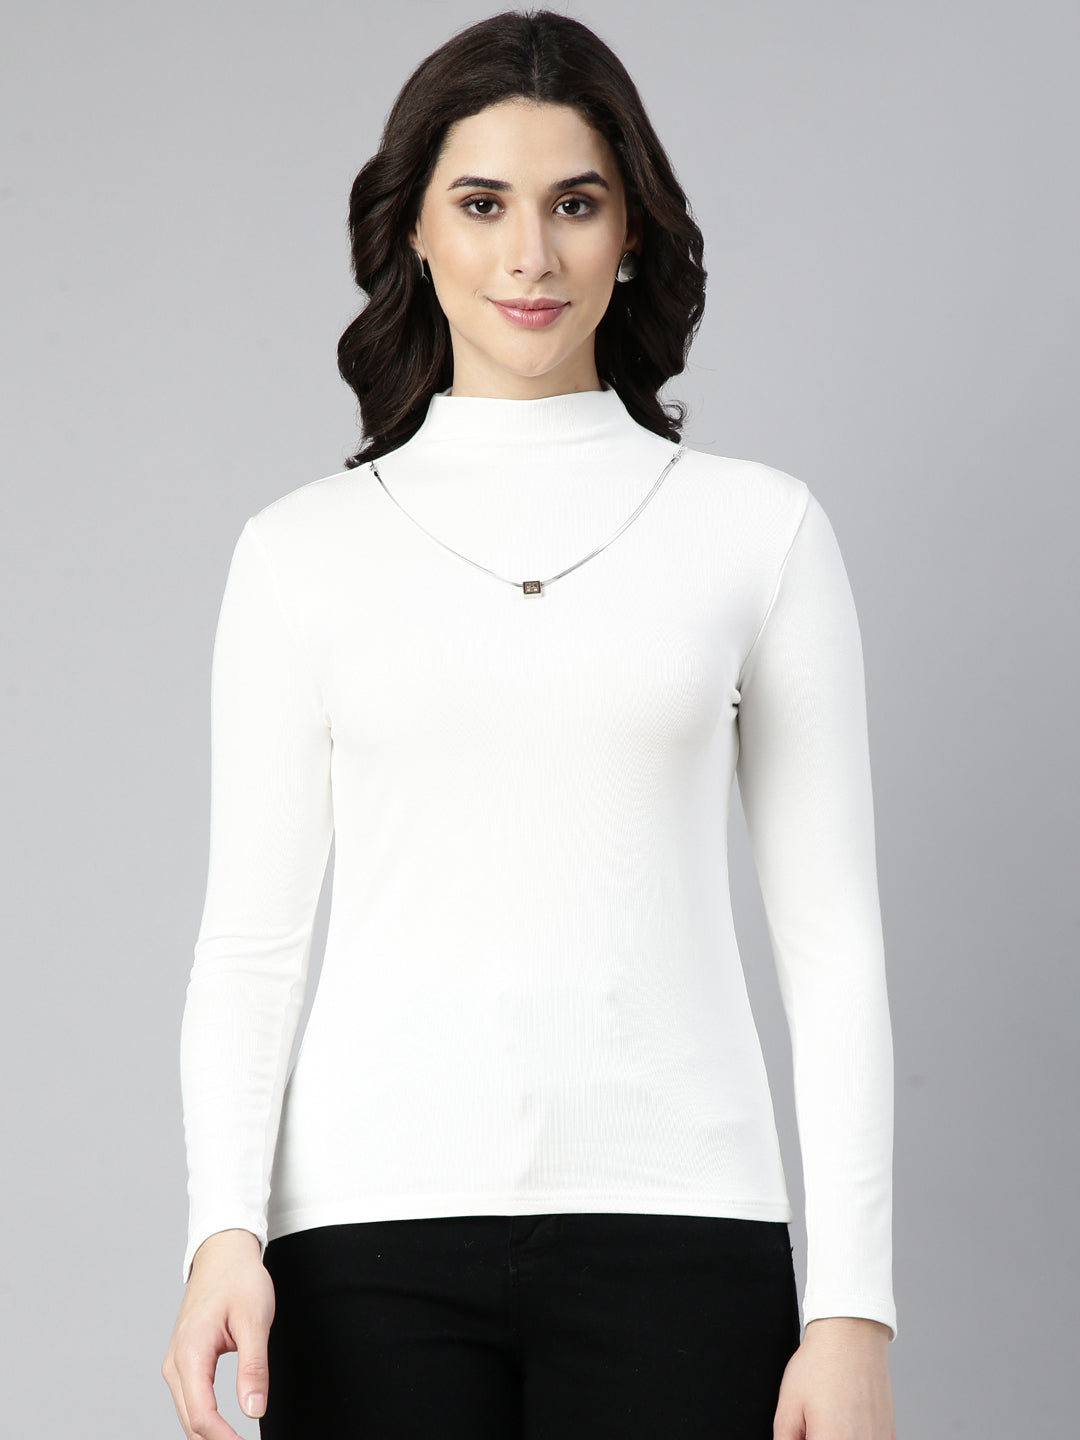 Women Solid Off White Top Comes with Neck Chain